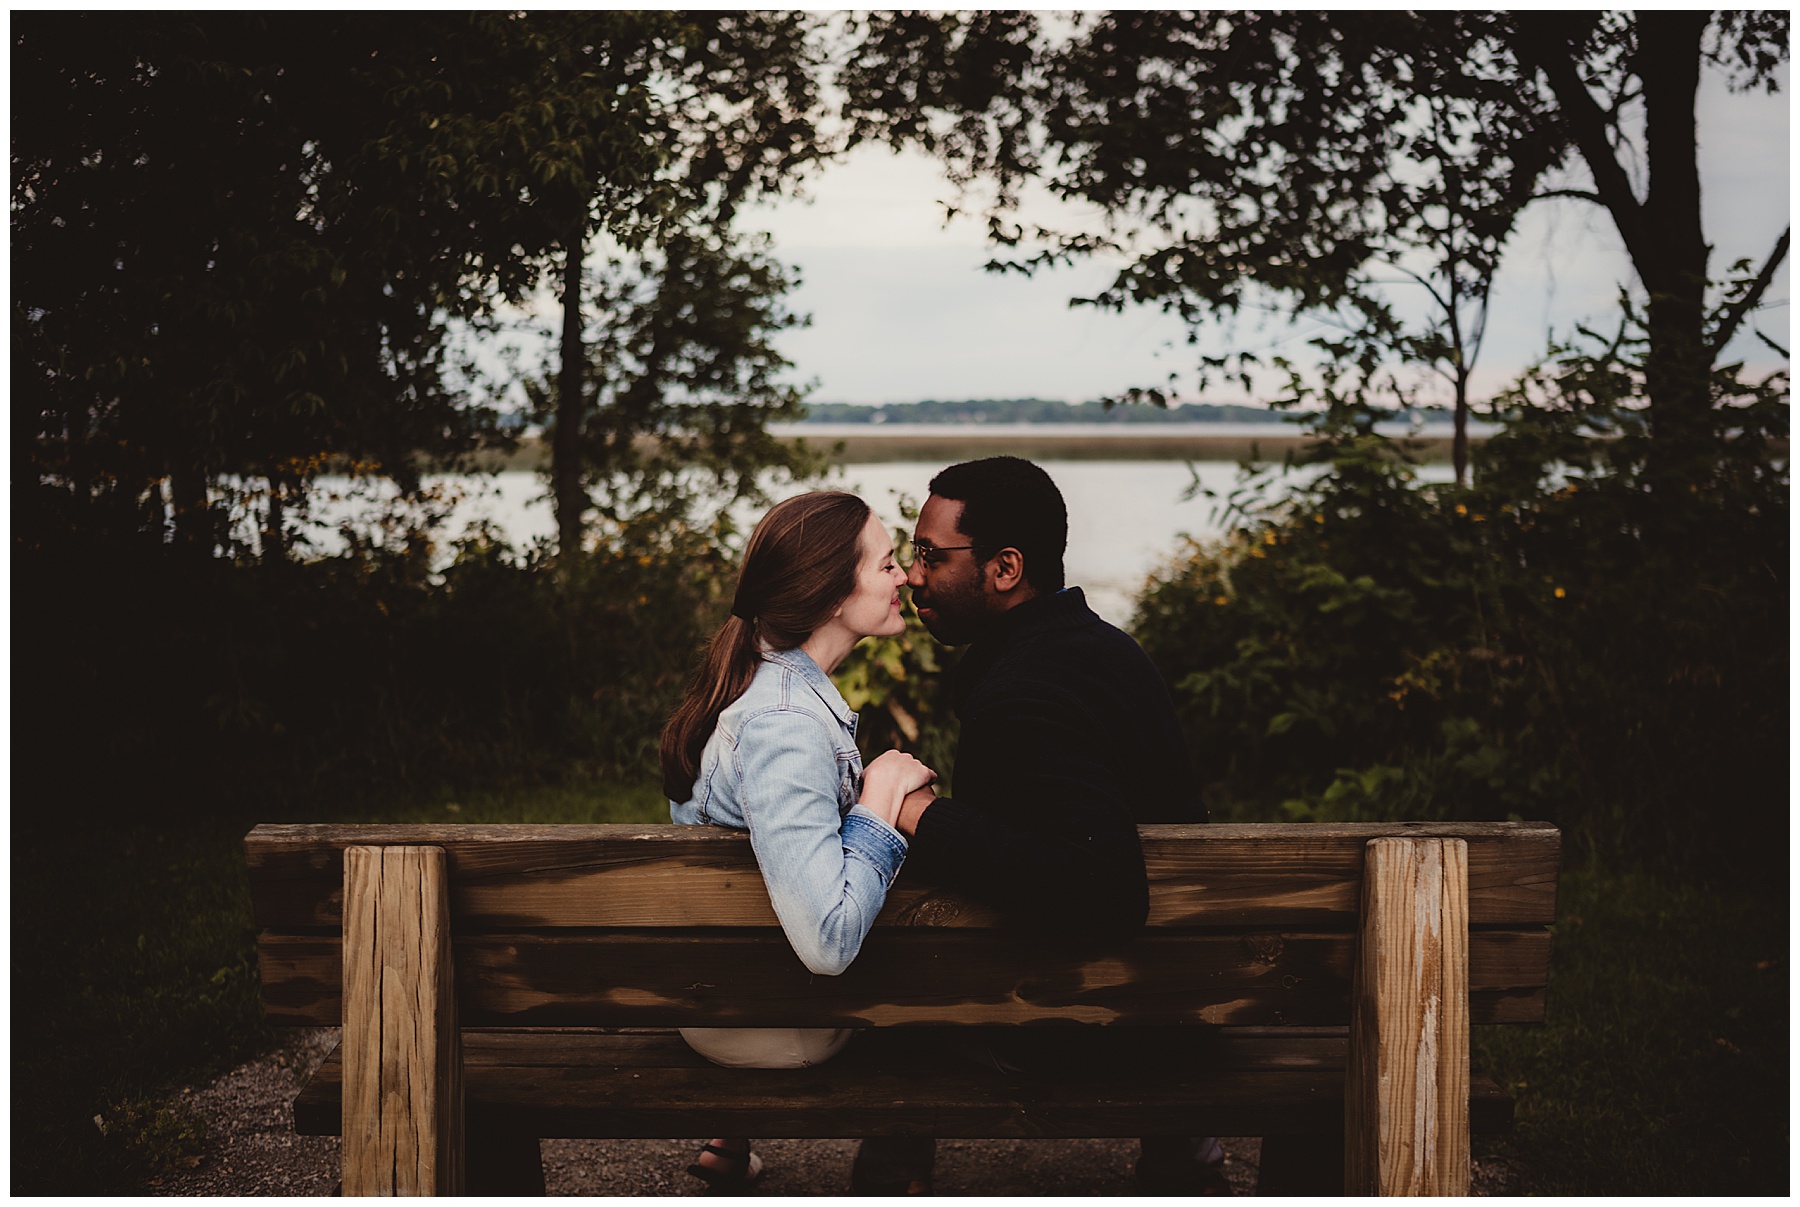 Couple on Bench by Water